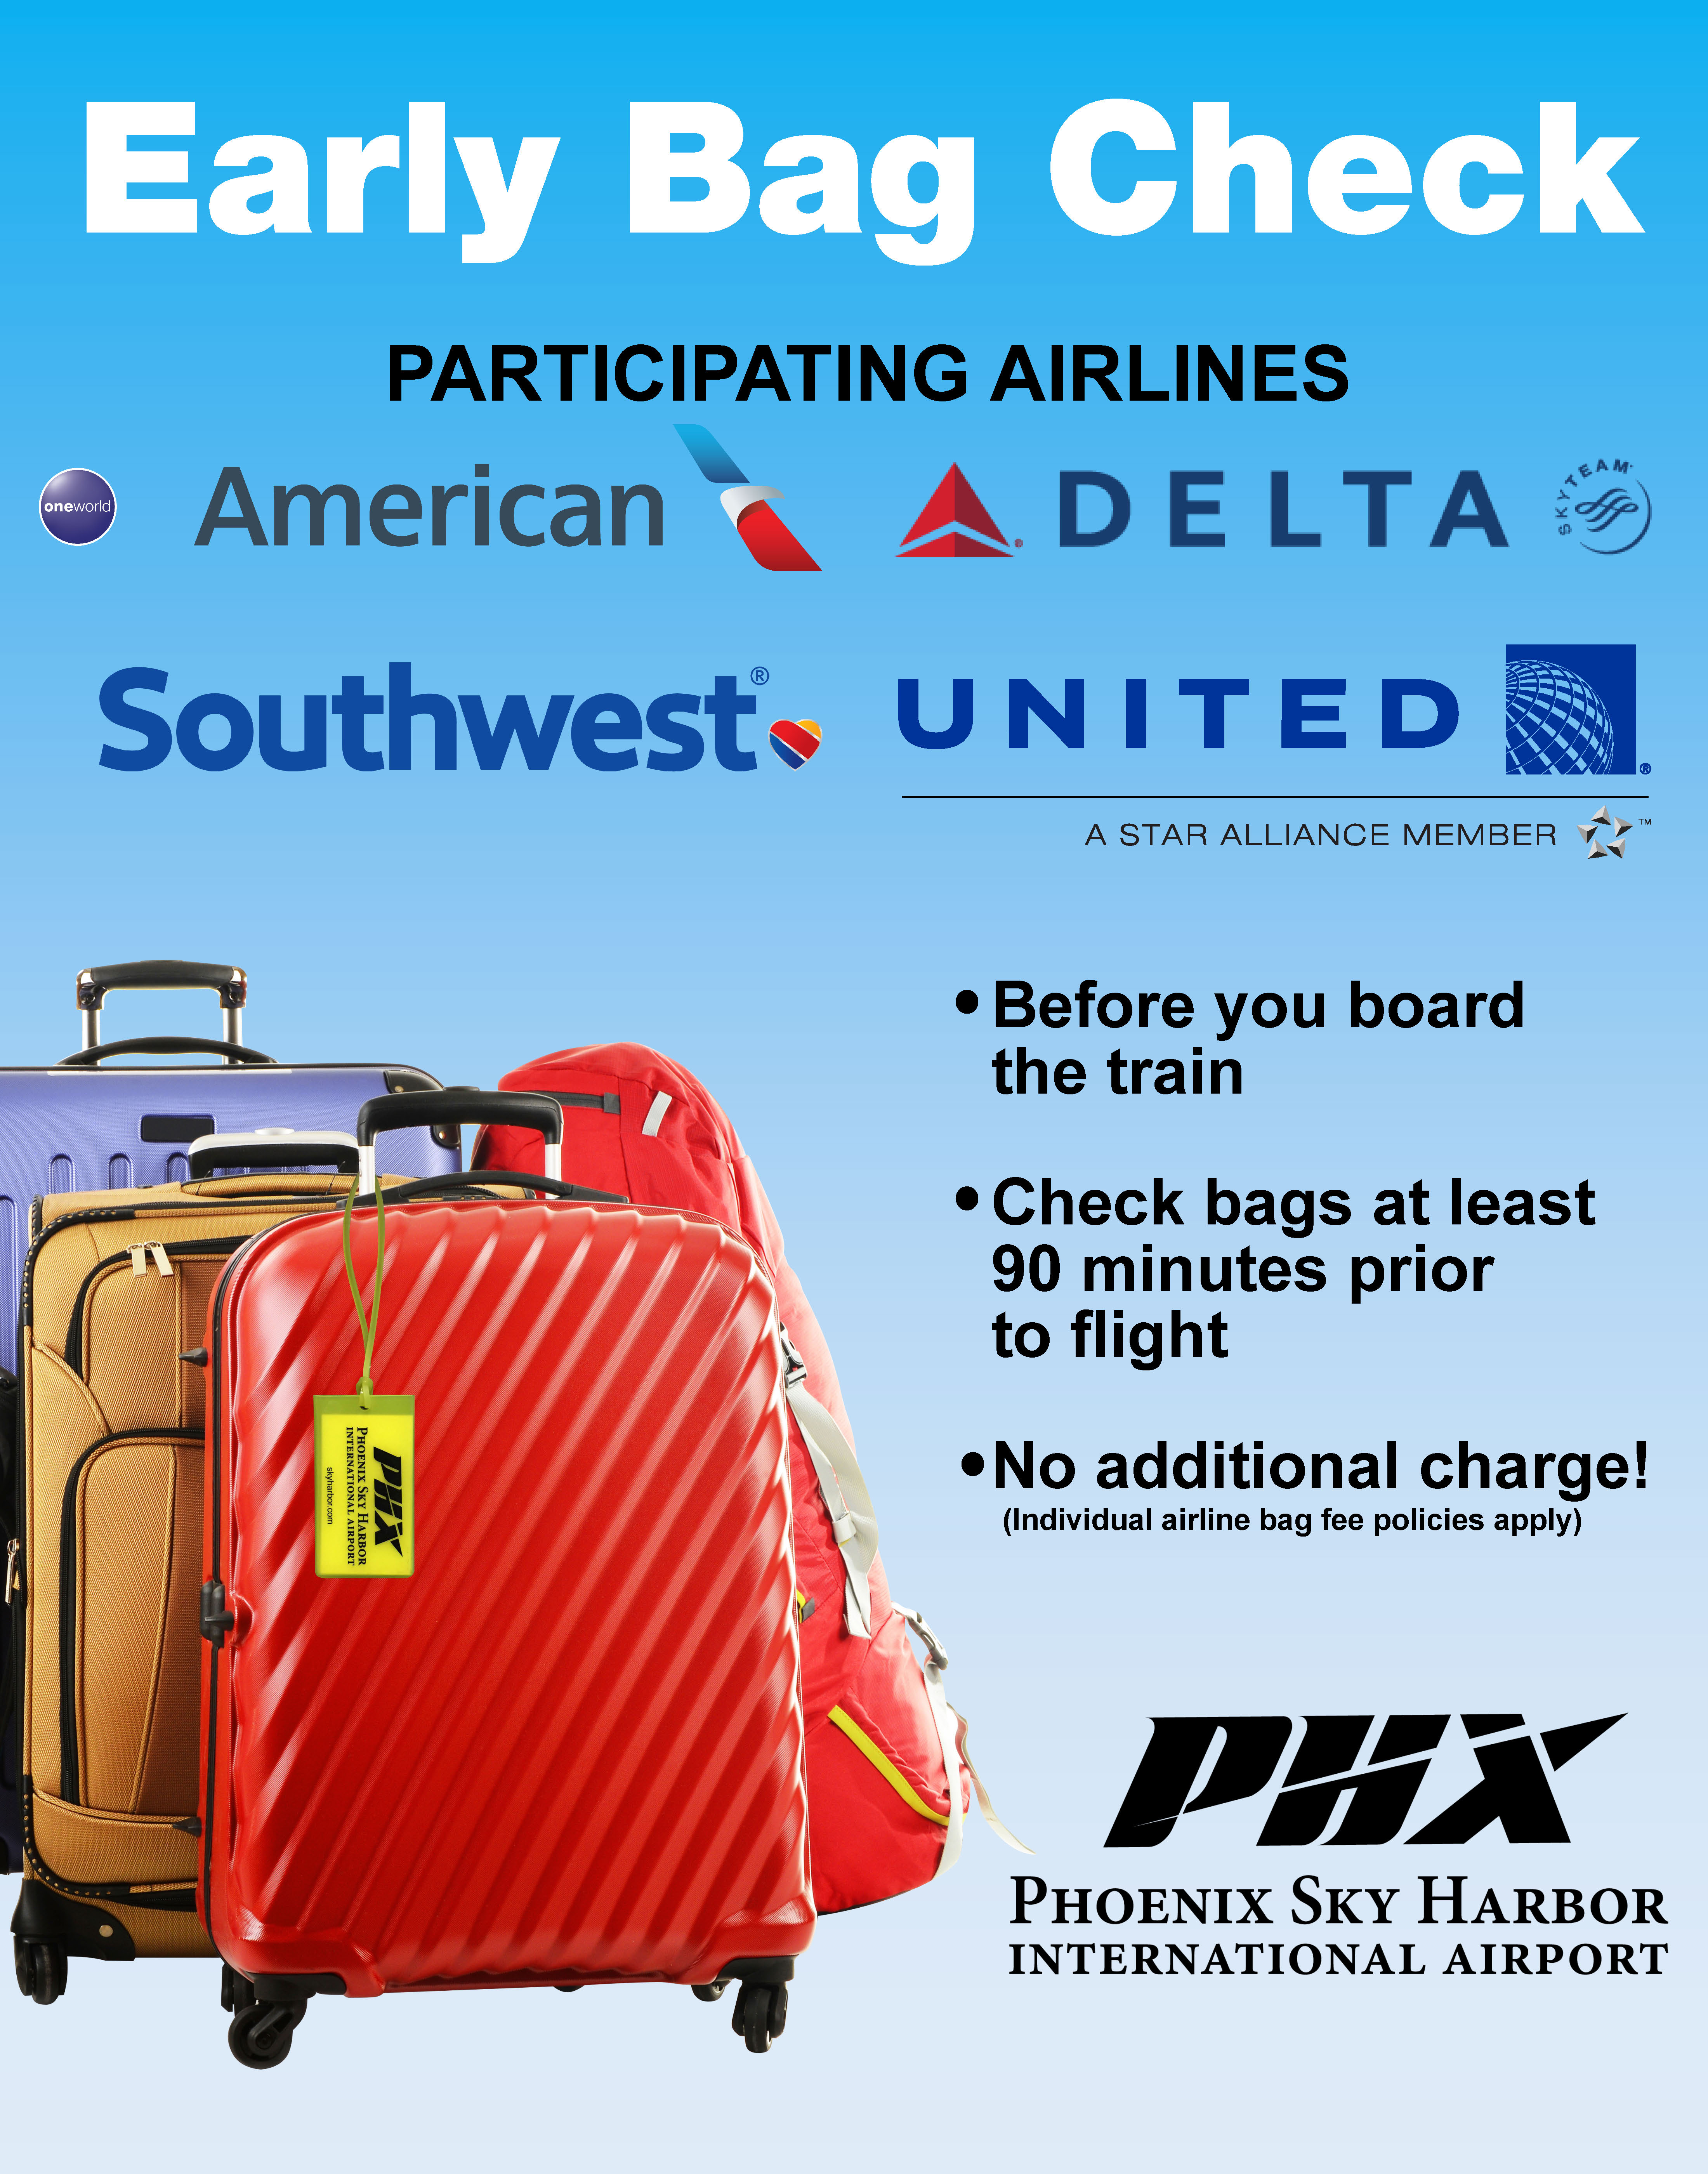 Early Bag Check flyer for PHX Sky Harbor International Airport